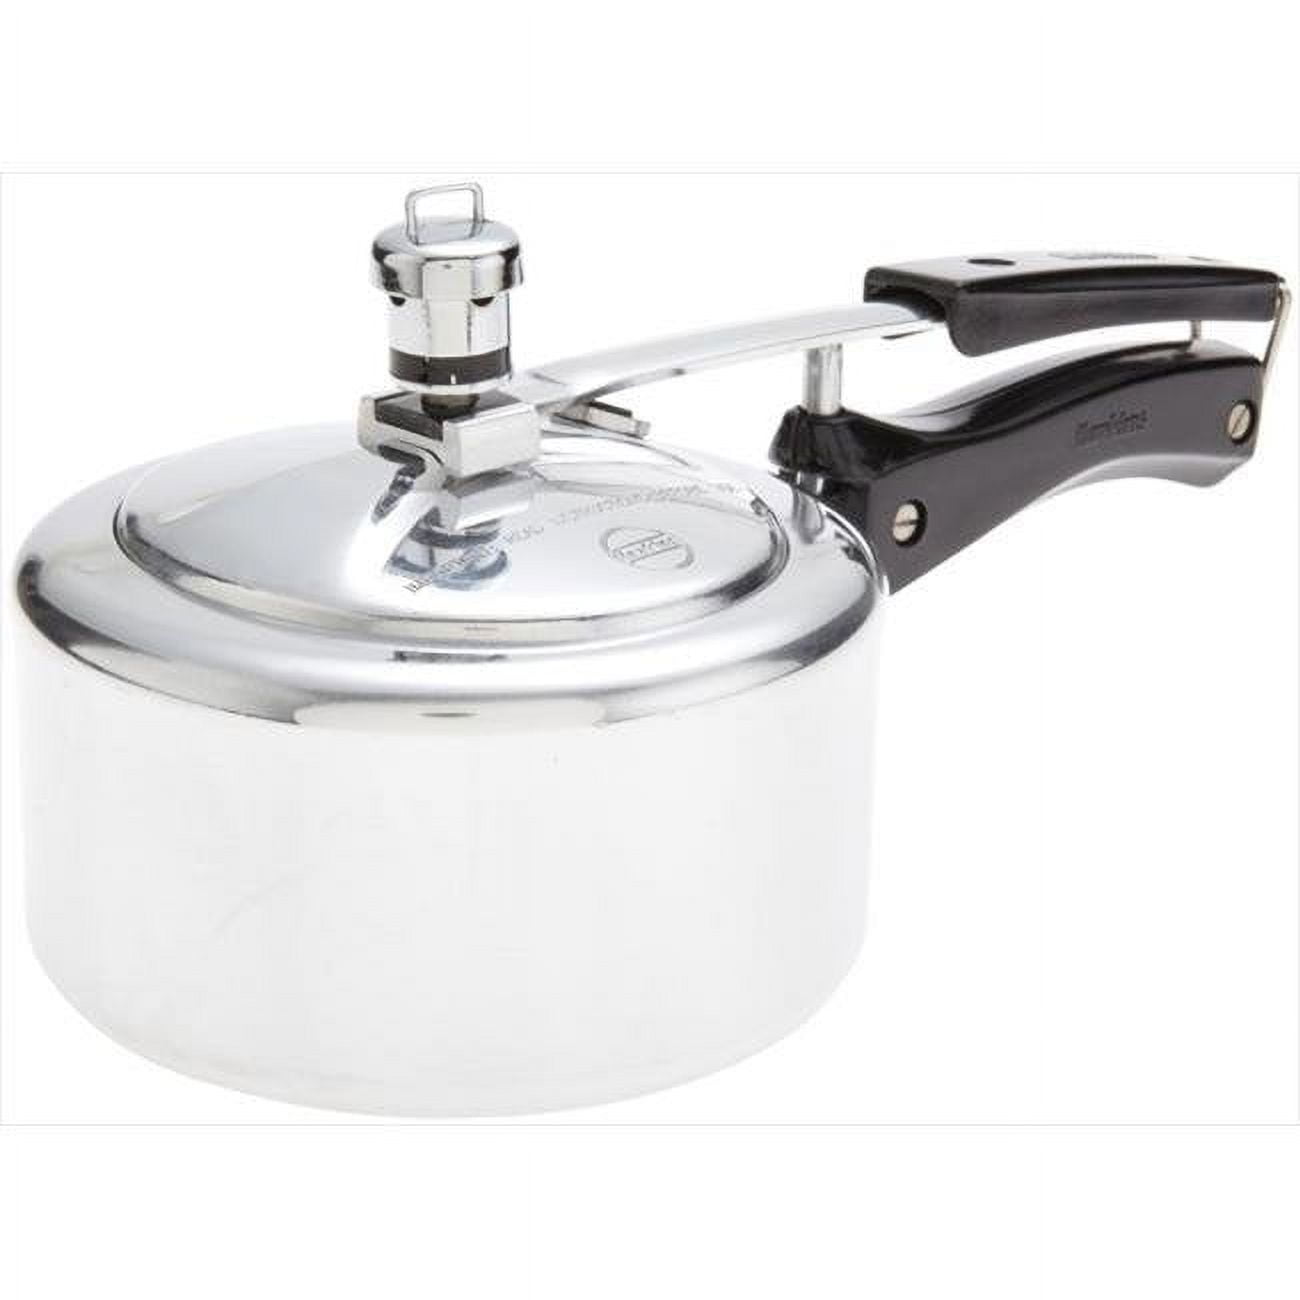 Top 5 Hawkins Pressure Cookers To Enjoy Perfect One-Pot Meals